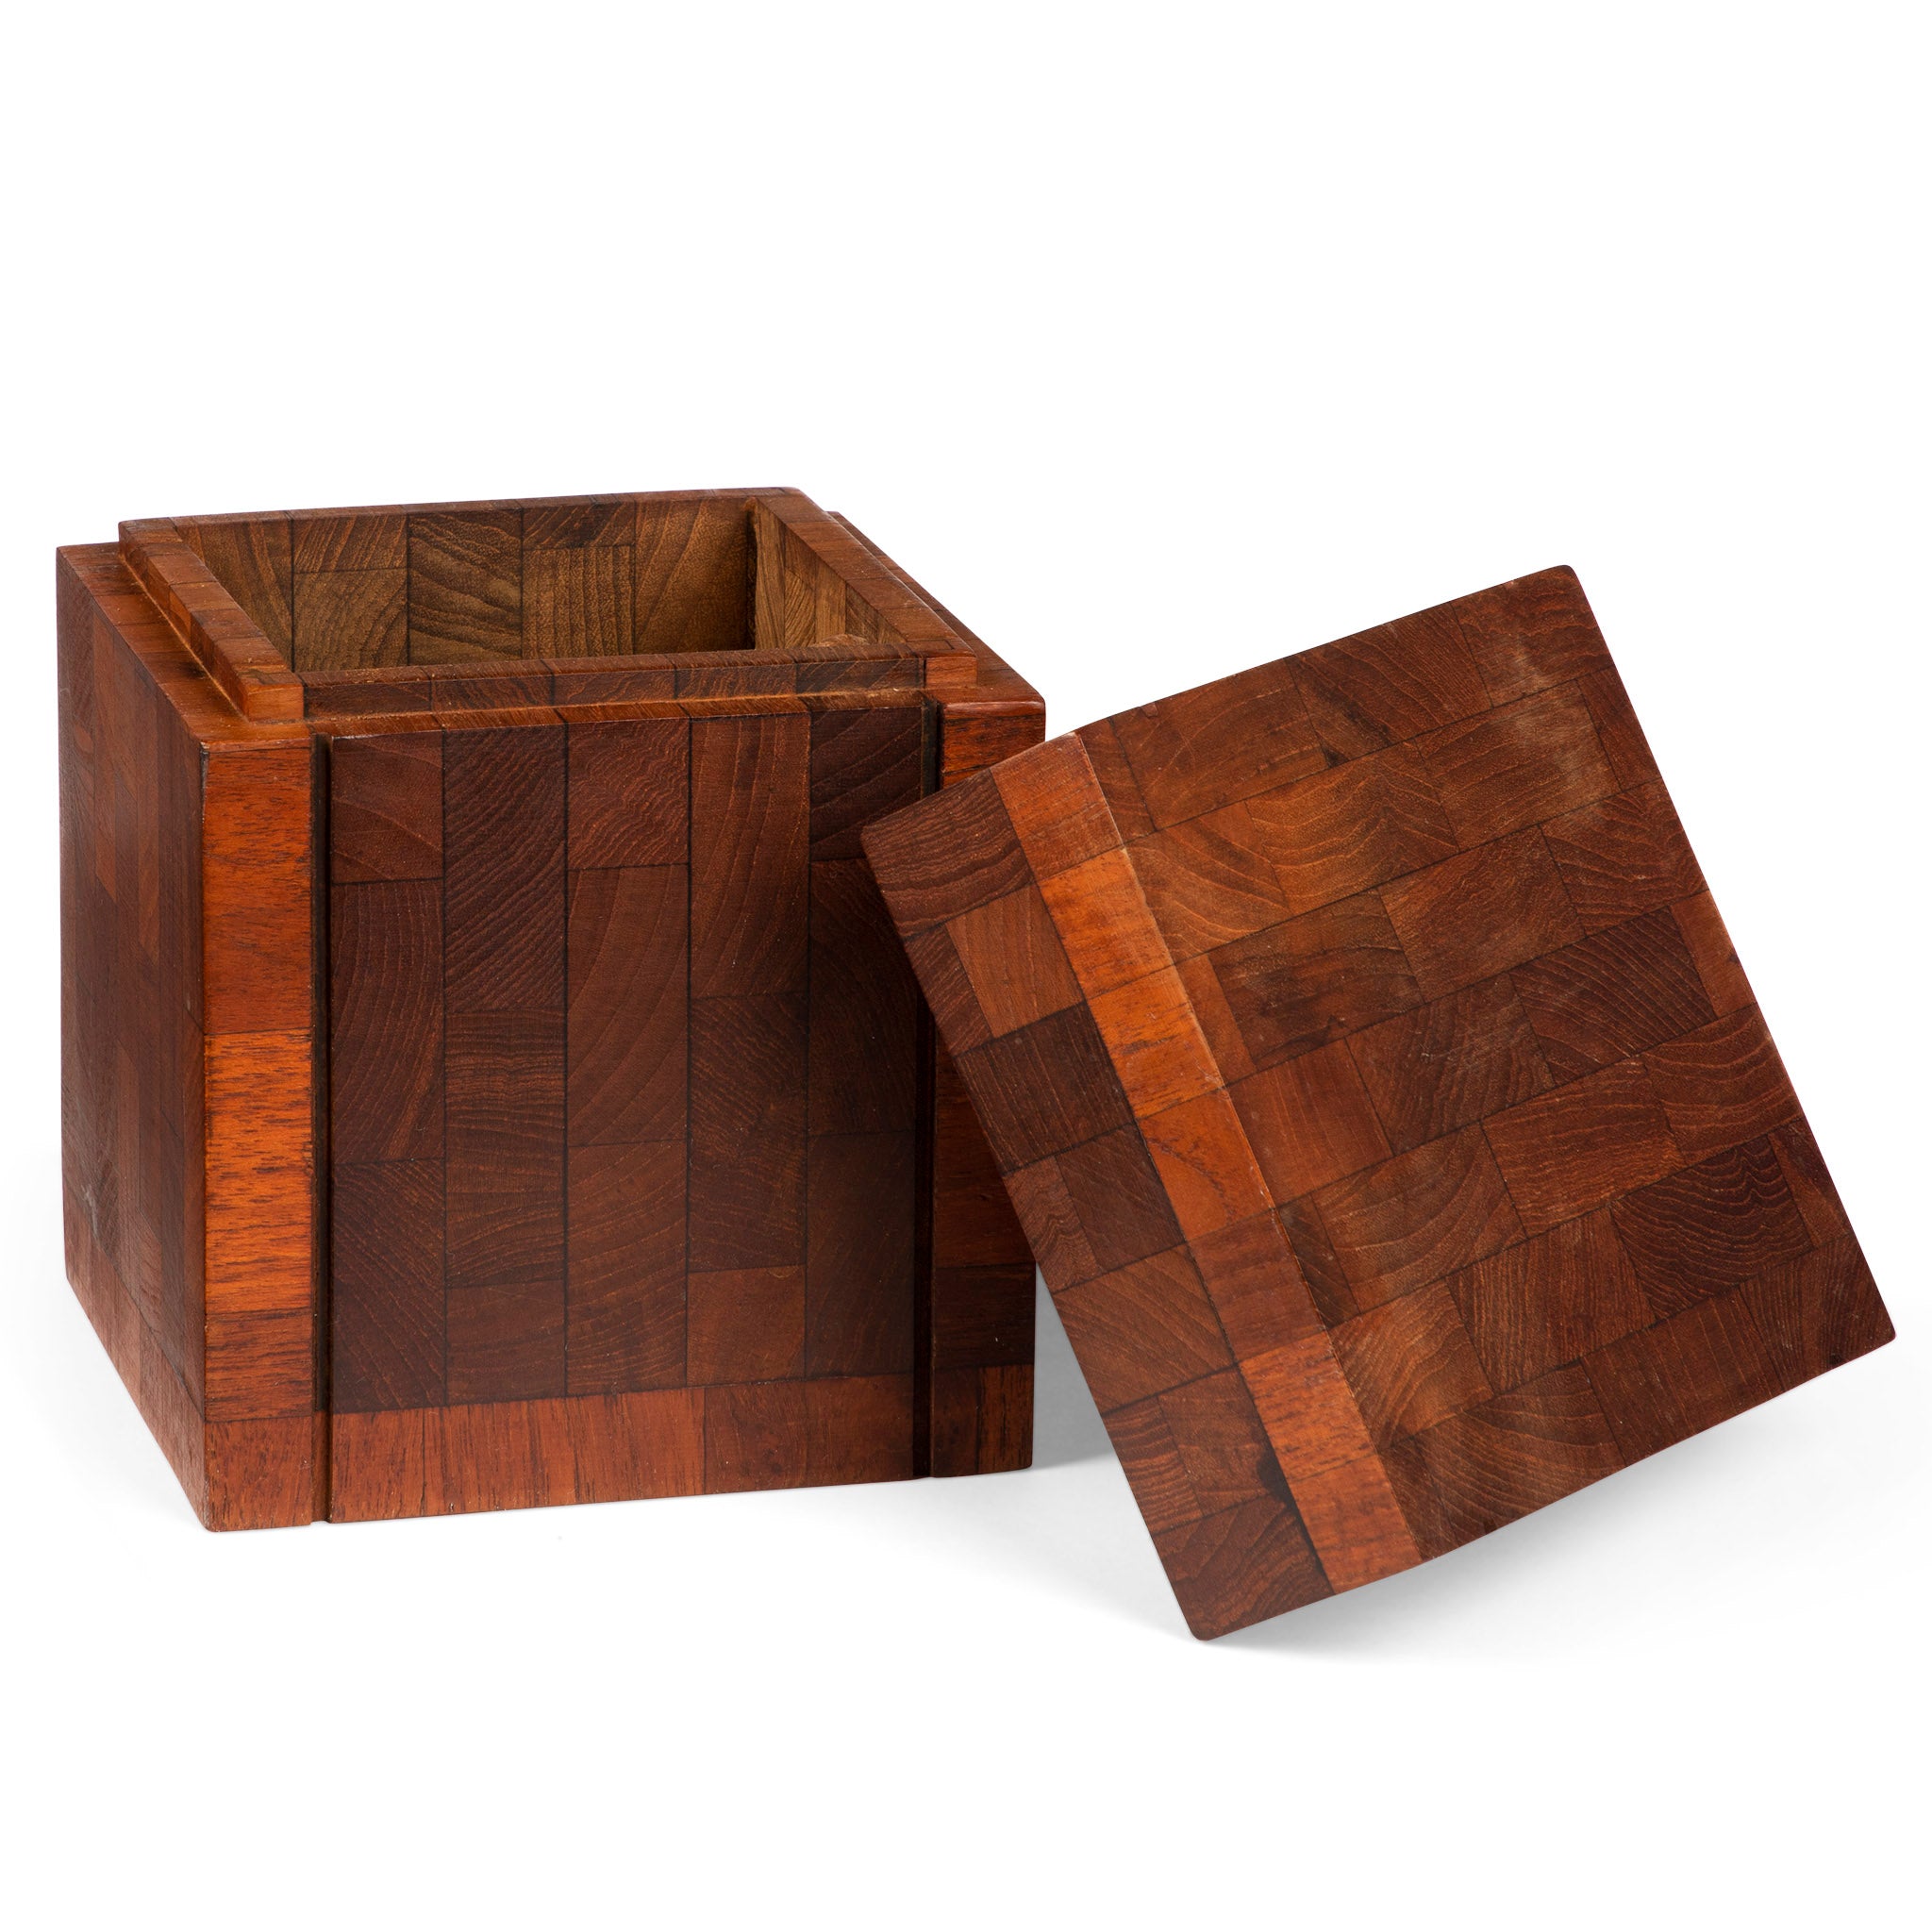 Alfred Dunhill Mid-Century Square Cigar Humidor